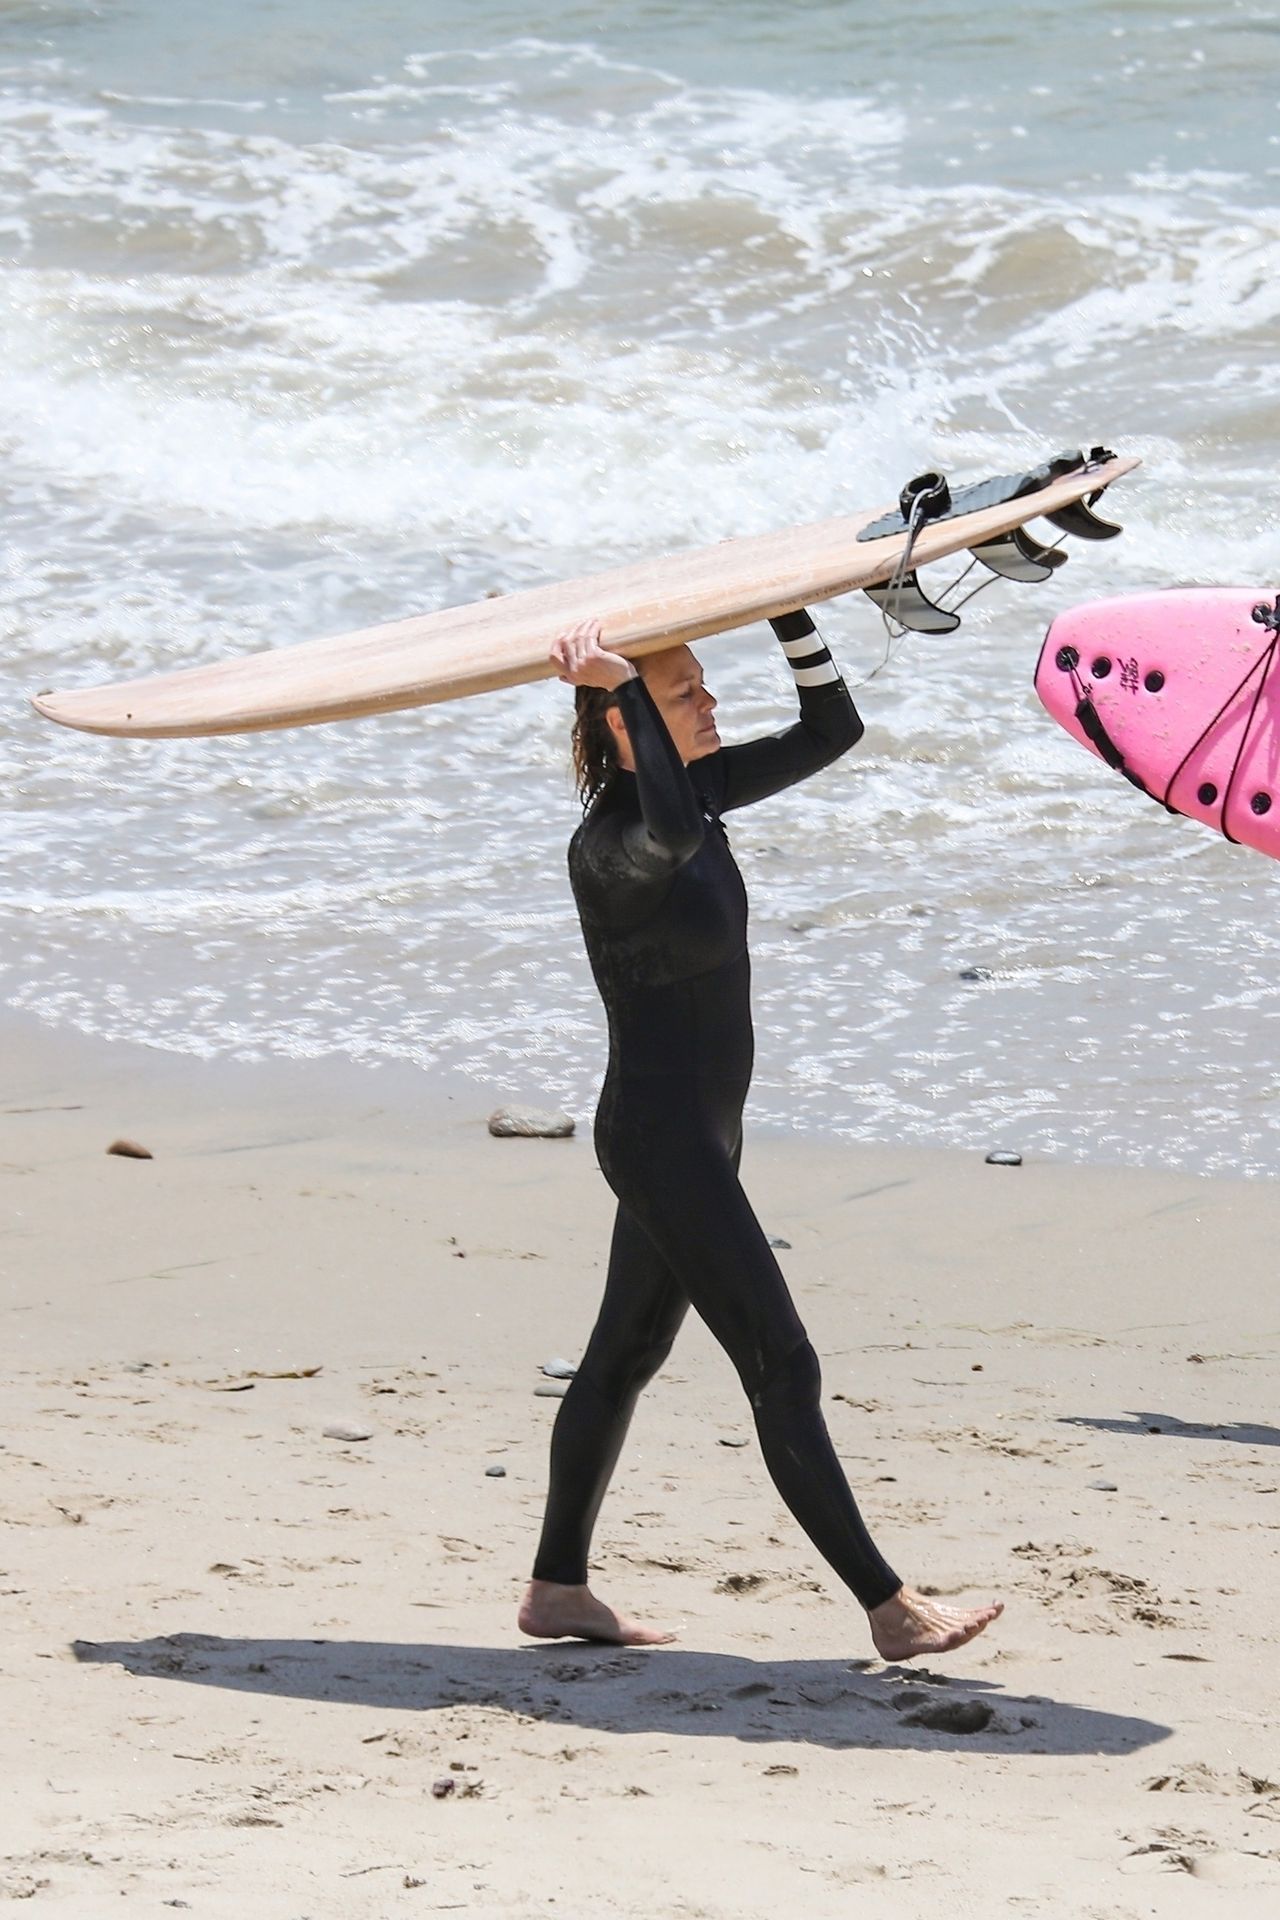 Robin Wright & Clement Giraudet are a Surfing Couple (91 Photos)